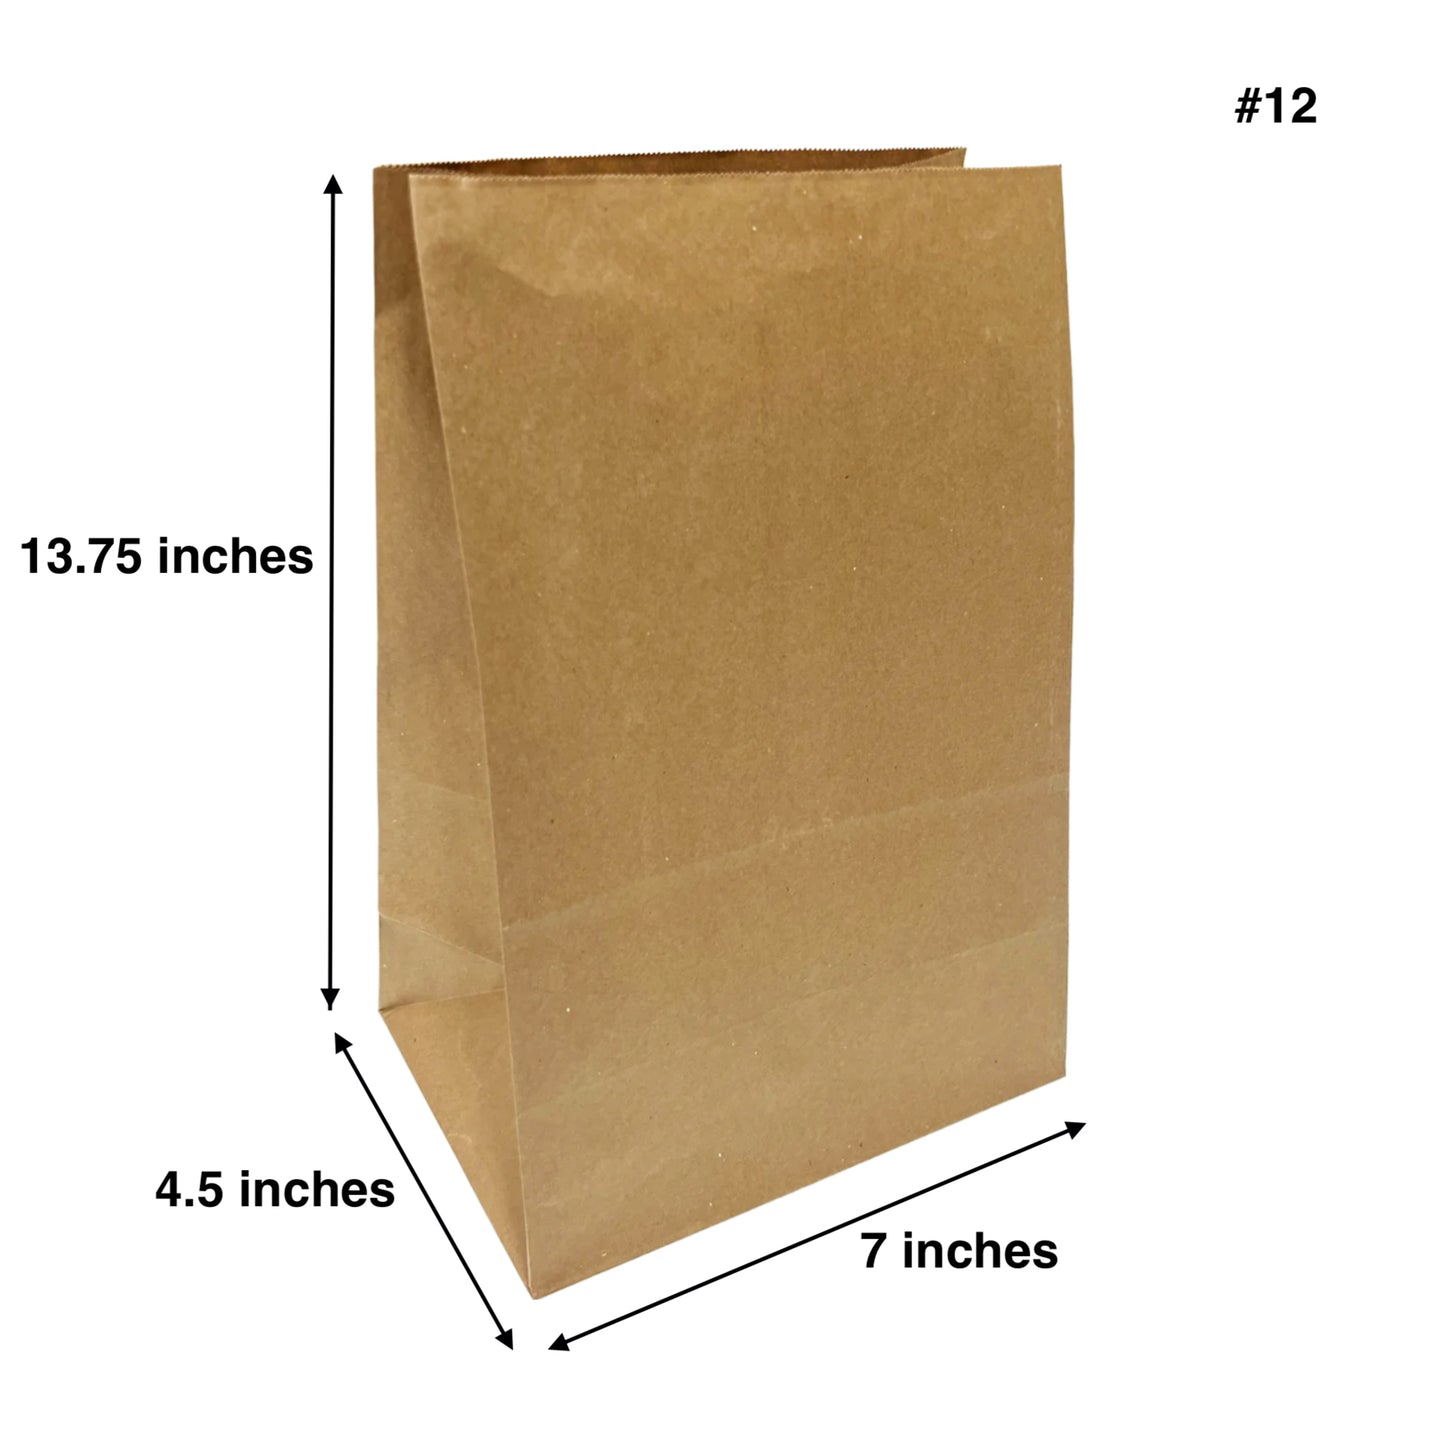 500pcs #12 Grocery Bags 7x4.5x13.75 inches; $0.06/pc